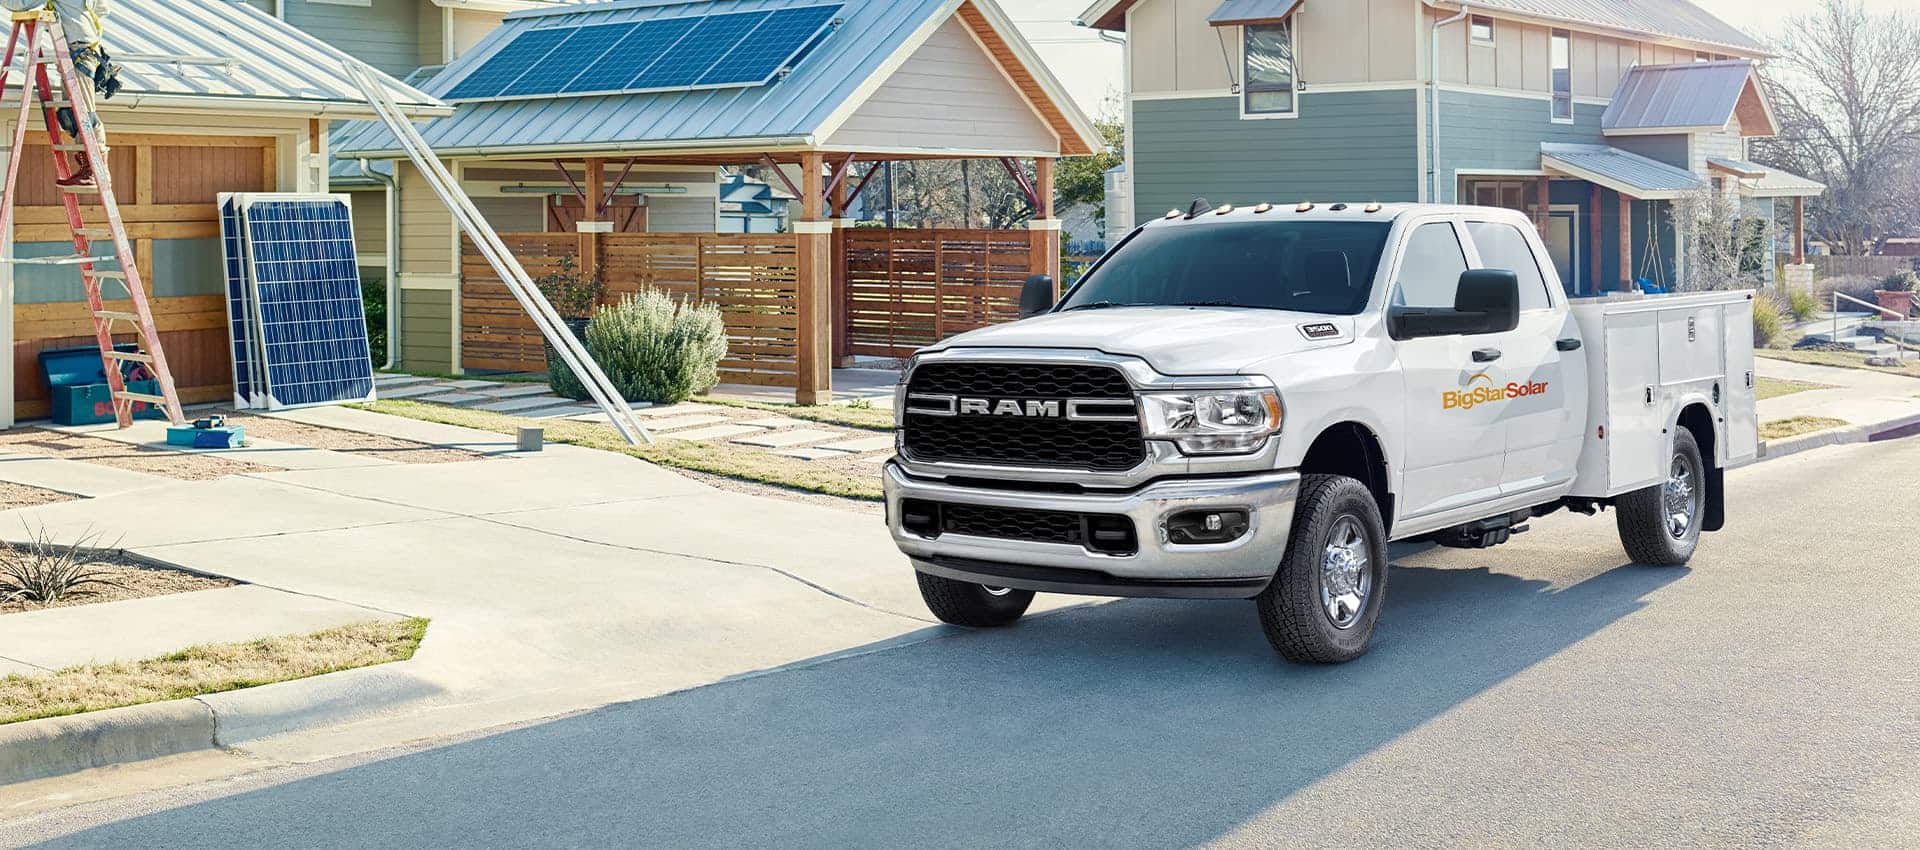 The 2023 Ram Chassis Cab with a solar company logo on its side, parked in front of a home with solar panels on the garage roof.